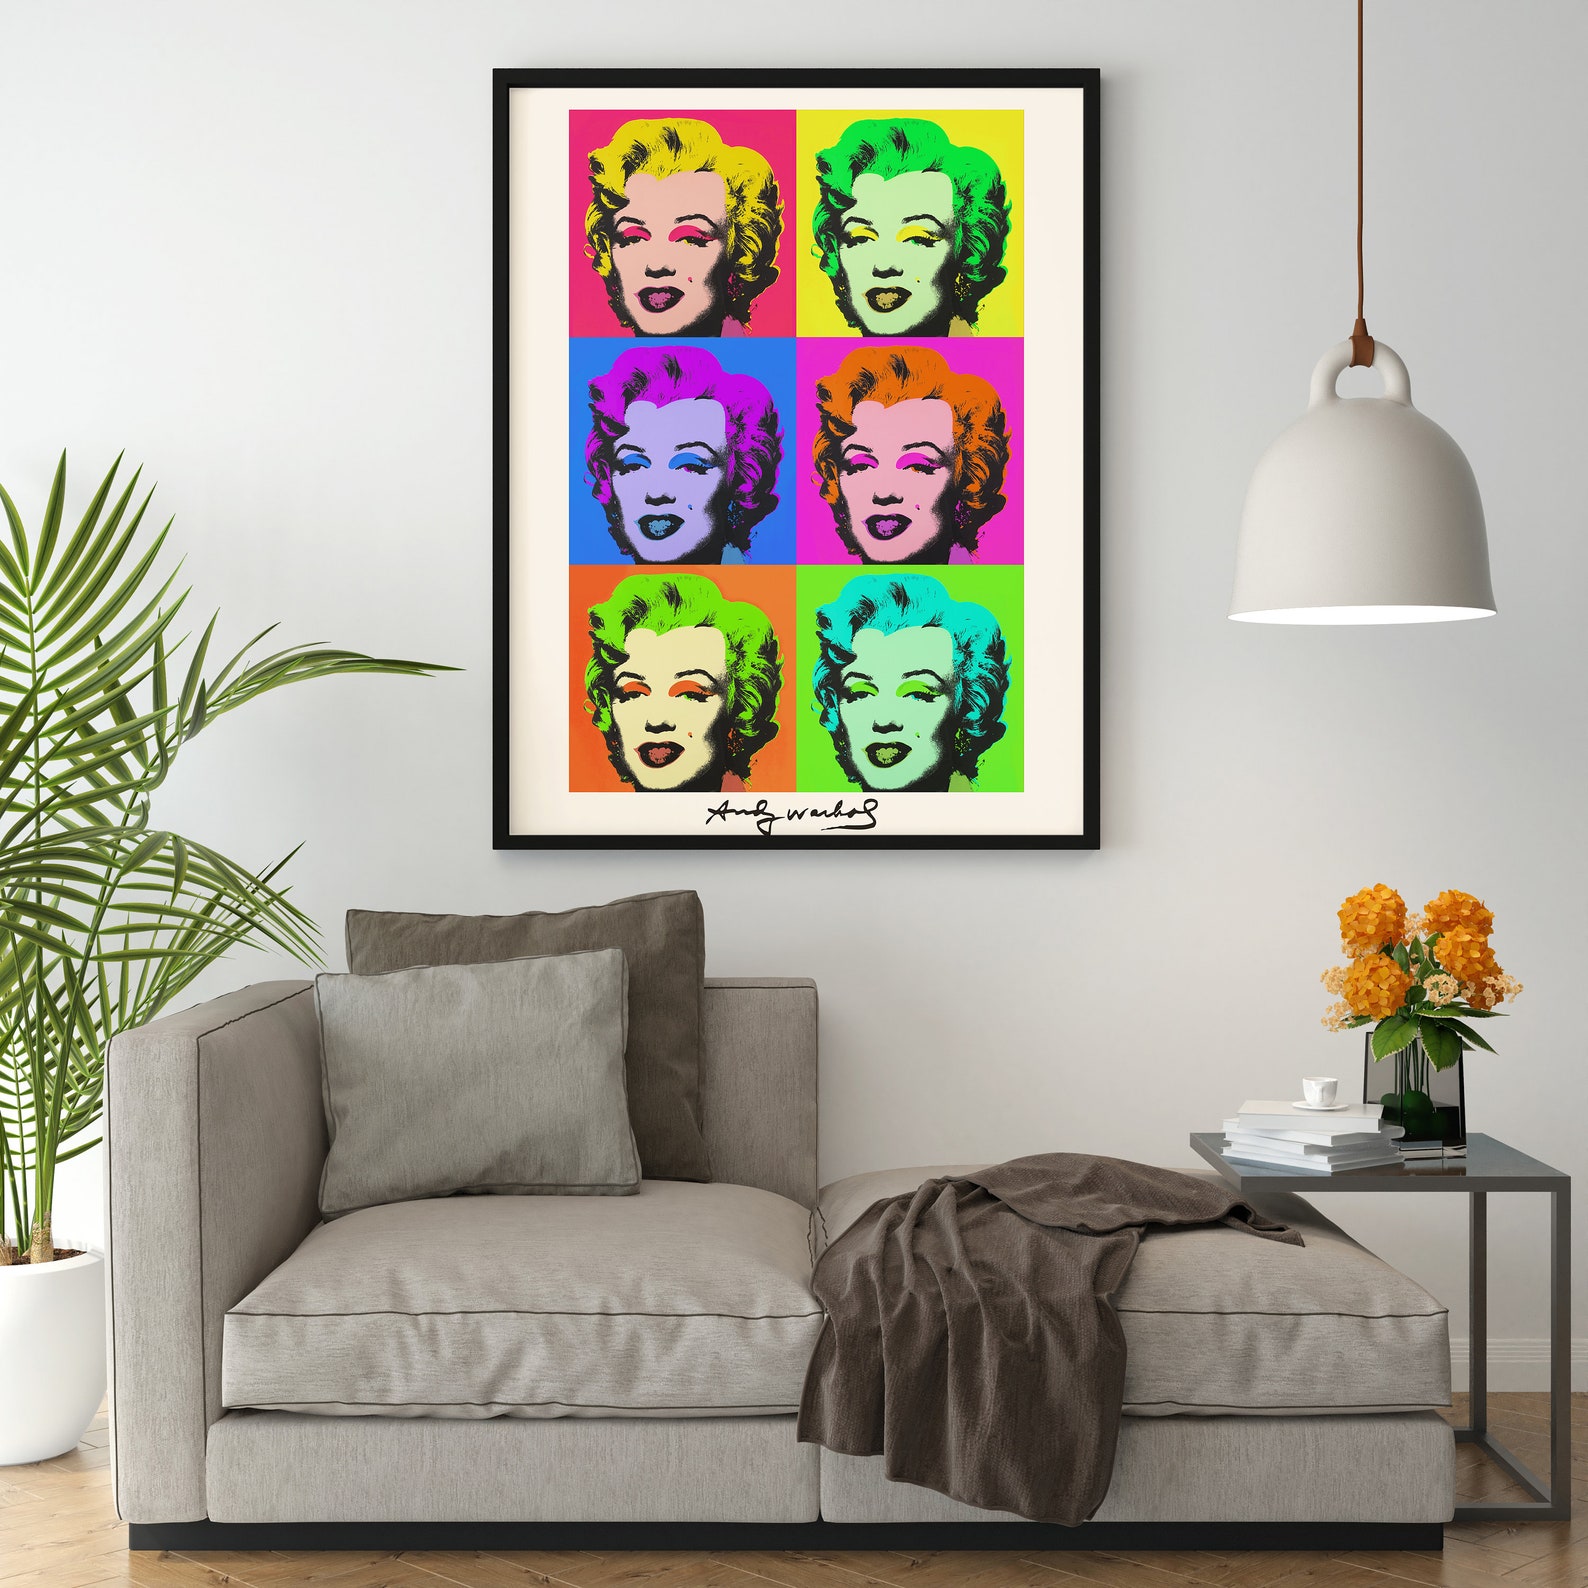 Andy Warhol Marilyn Monroe Poster Prints Exhibition Poster - Etsy